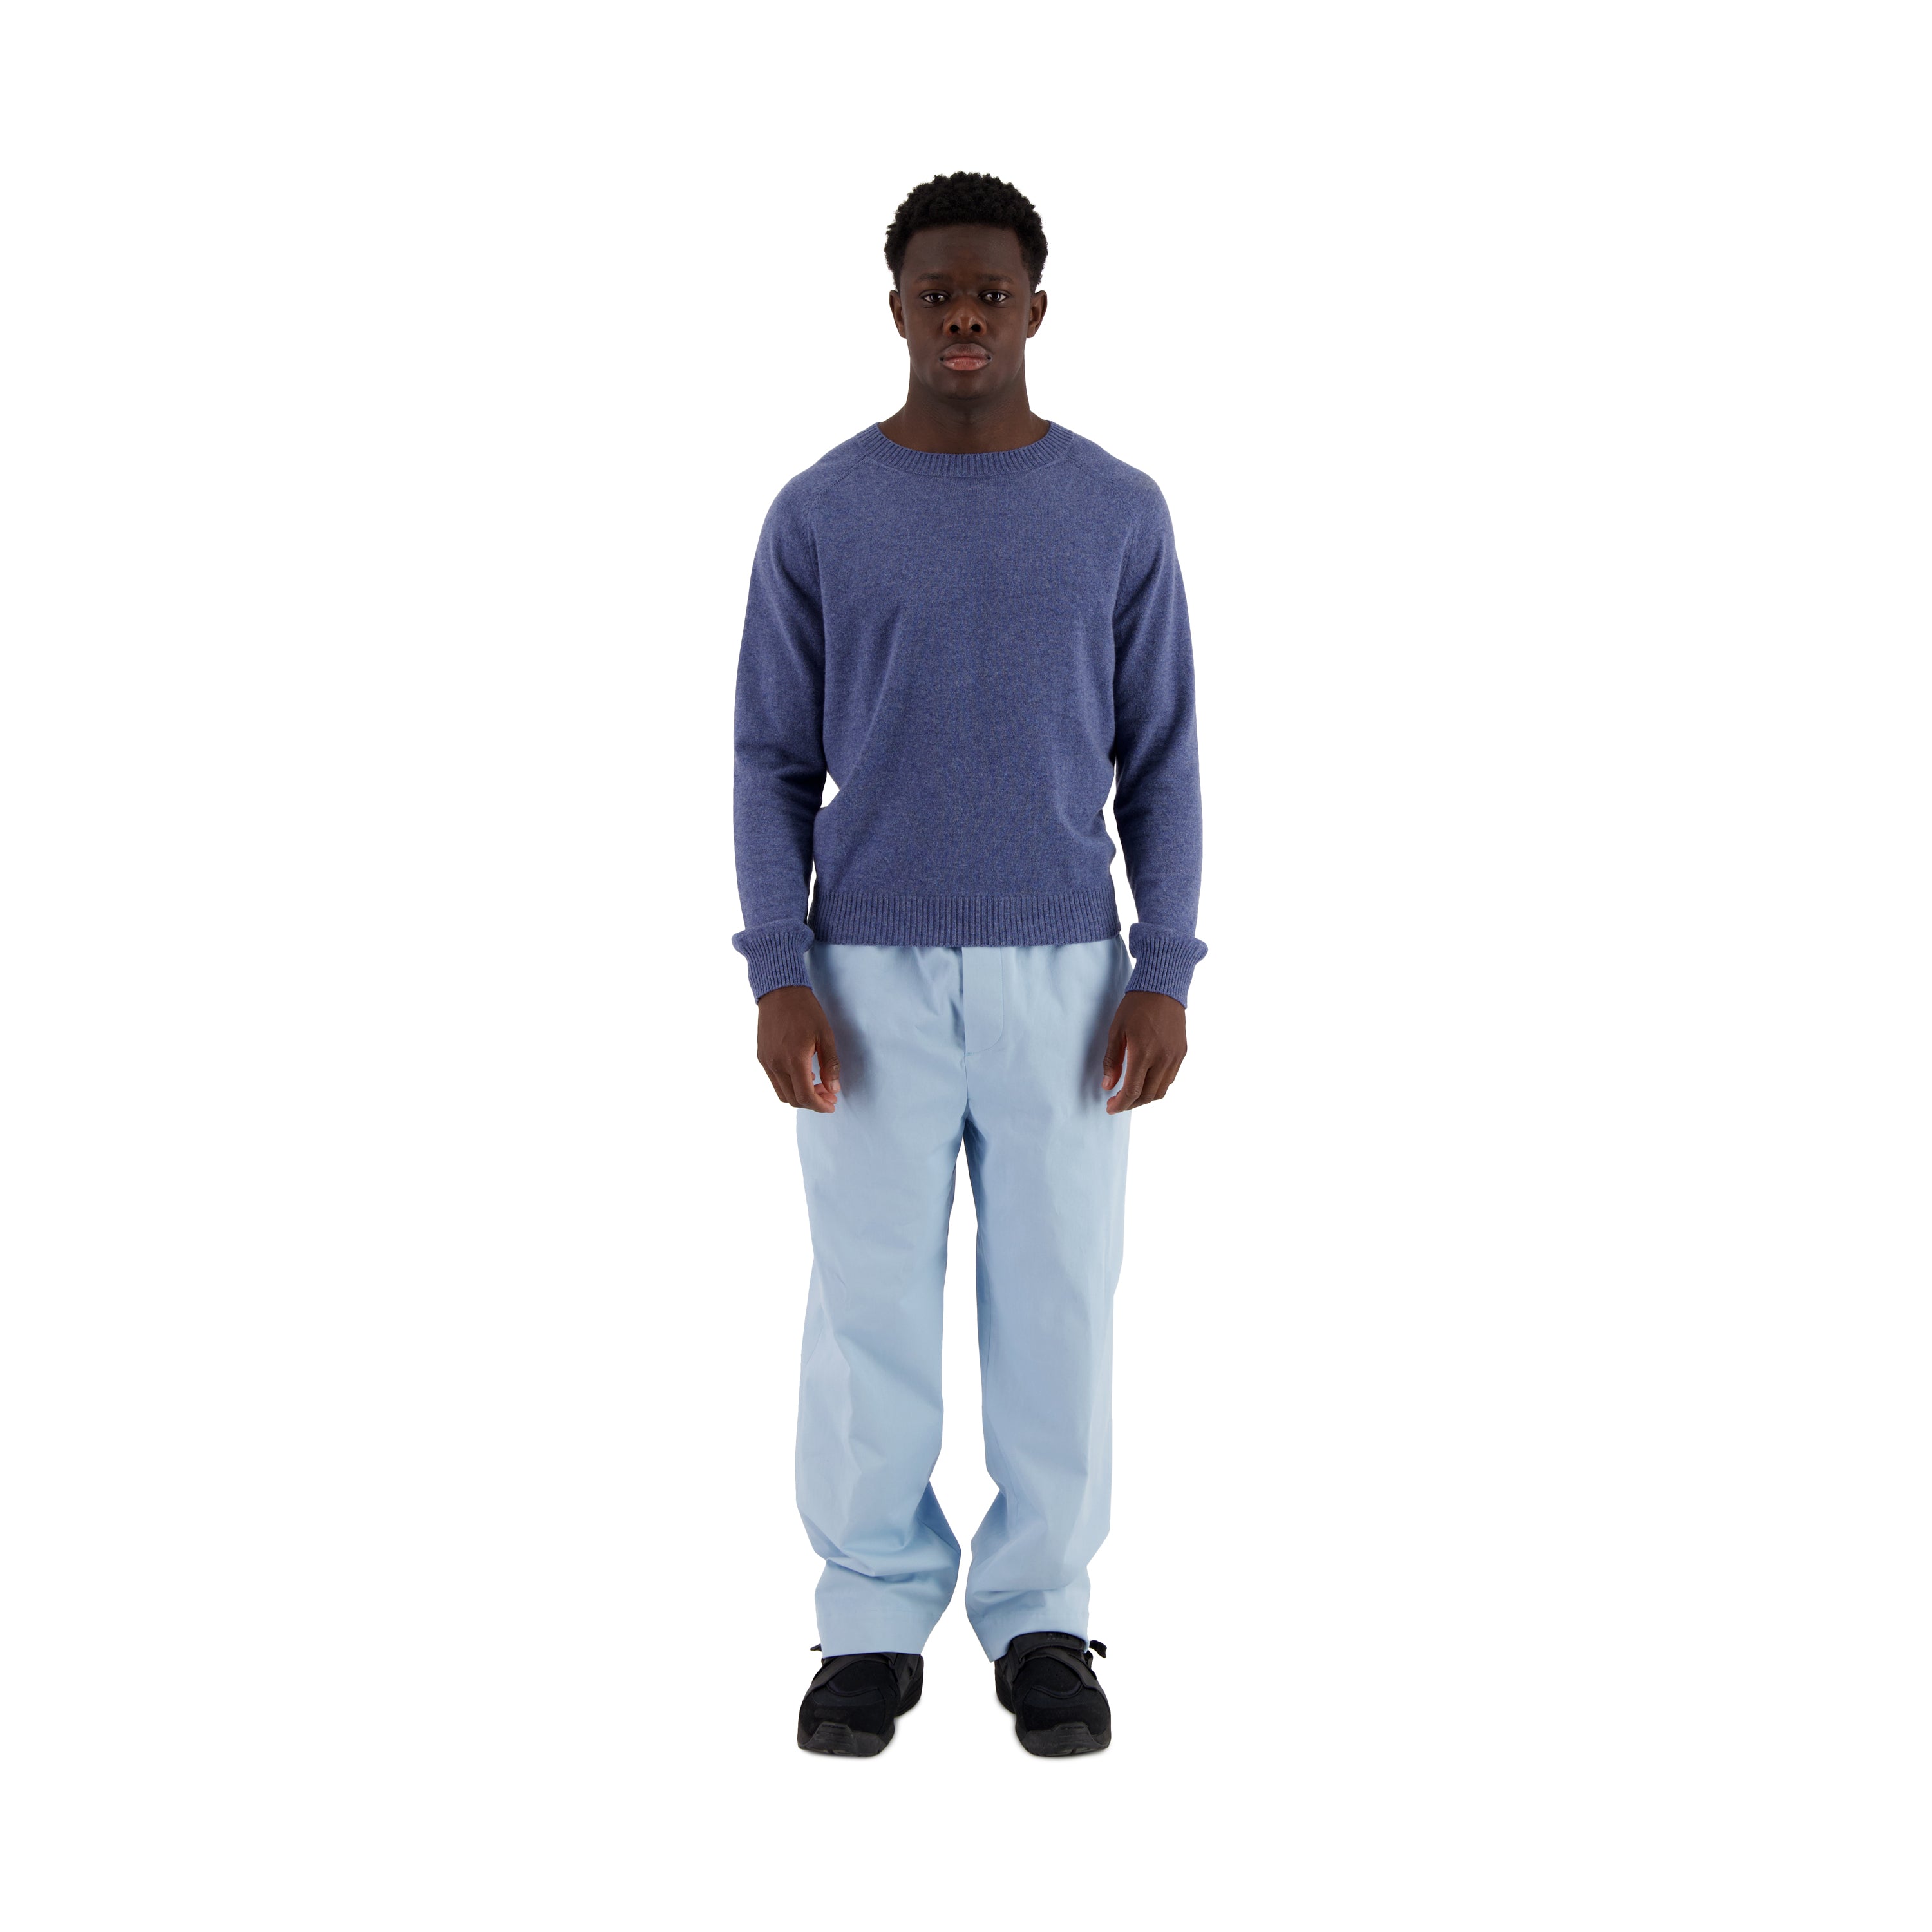 Buy Puff Casual Trouser for Men,Color Ice Blue,Size 34 at Amazon.in